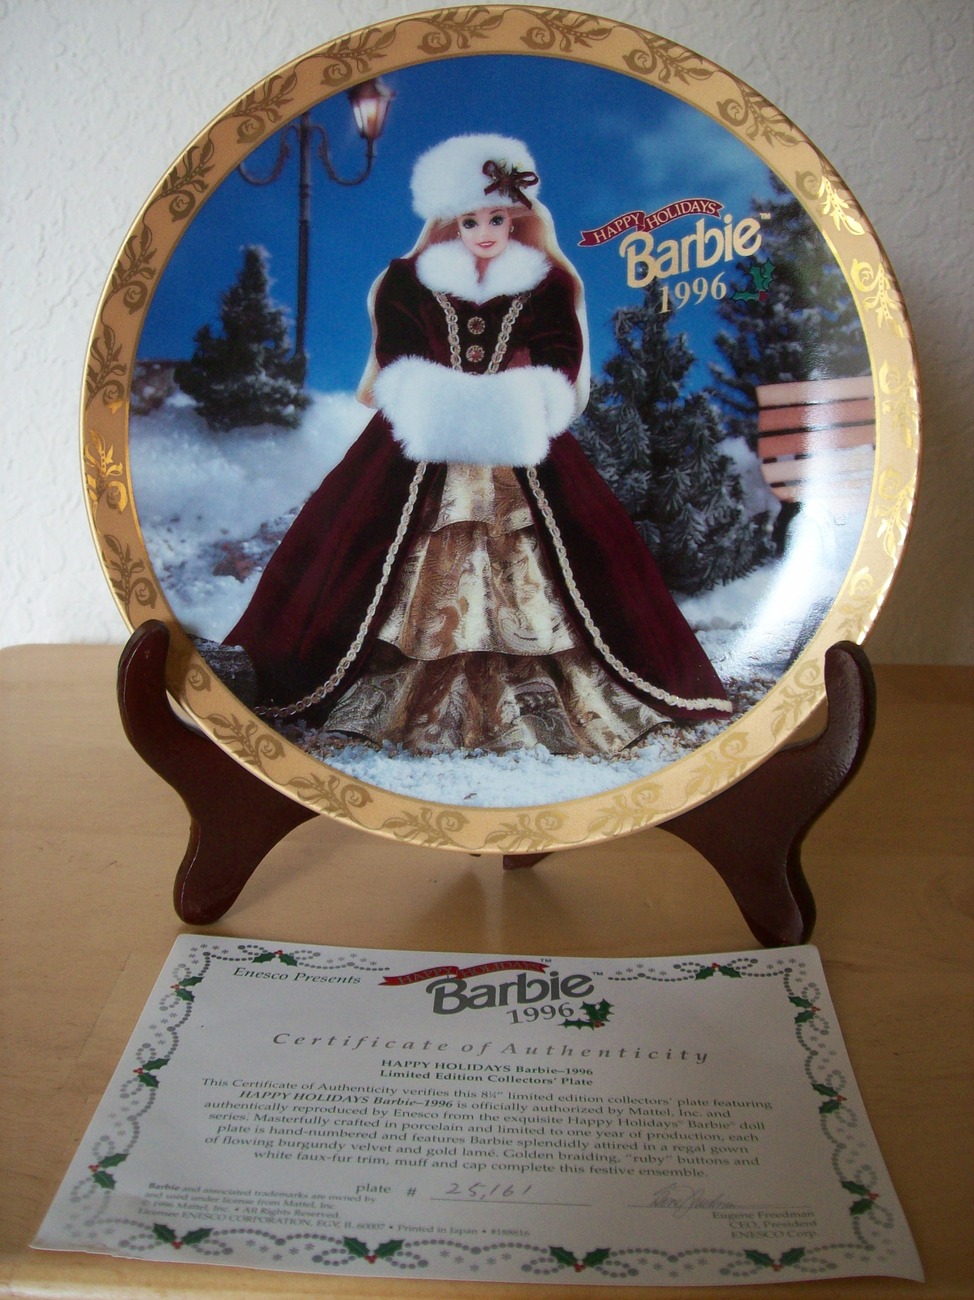 Primary image for 1996 Barbie Enesco Christmas Limited Edition Collector’s Plate.